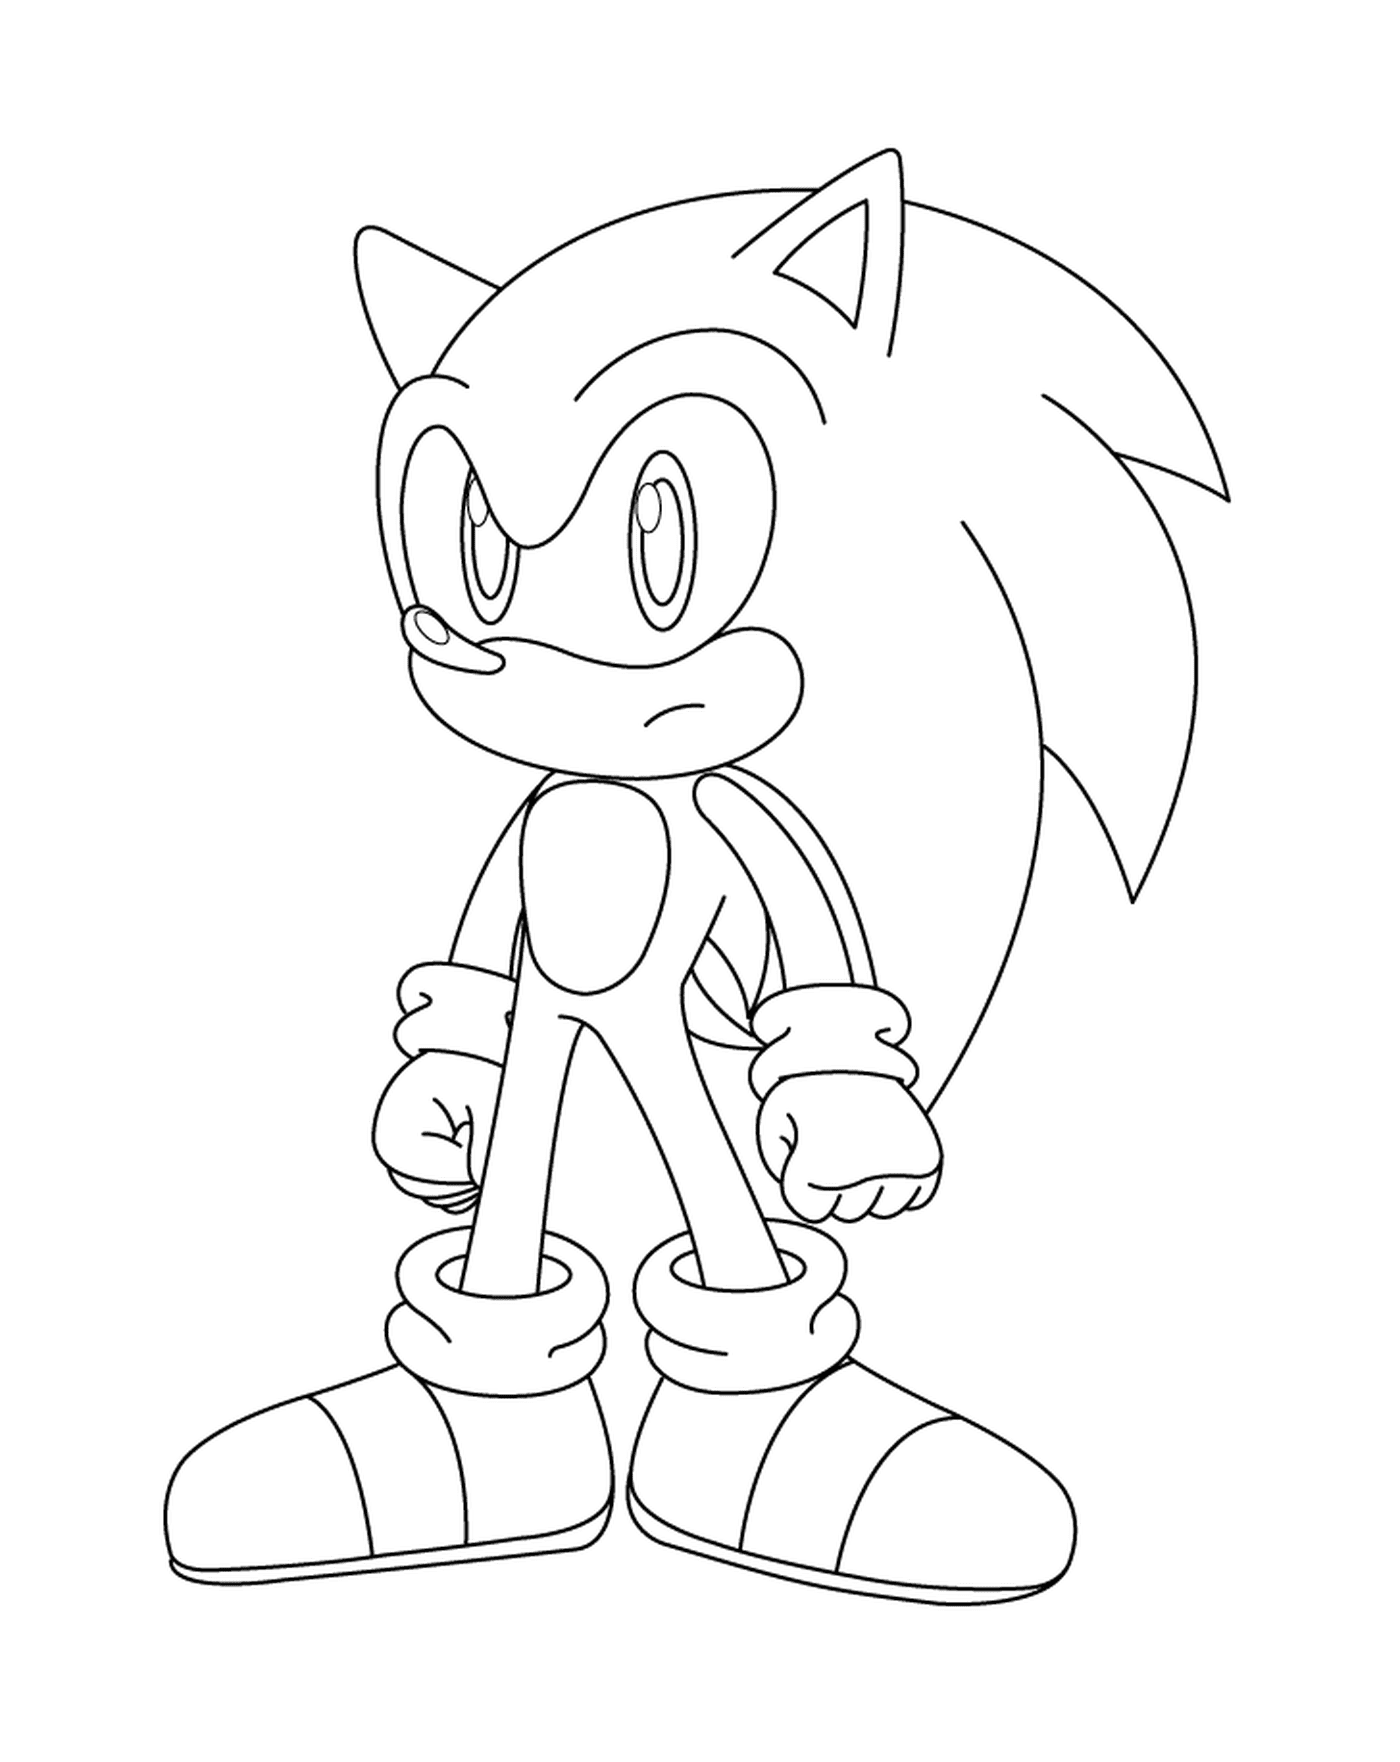  Powerful and fast Sonic 